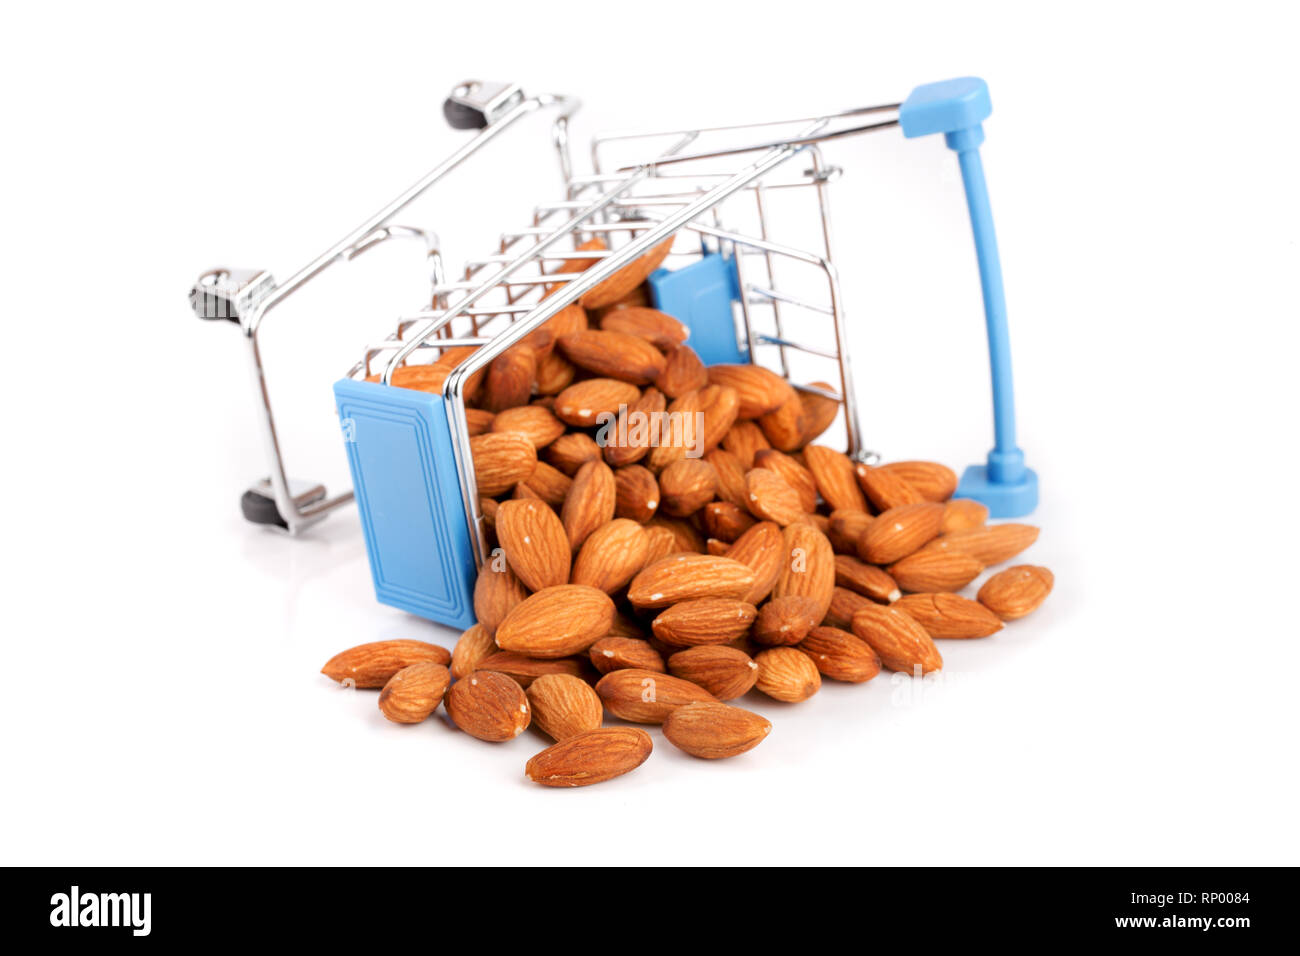 Shopping cart with raw almond isolated on white background Stock Photo